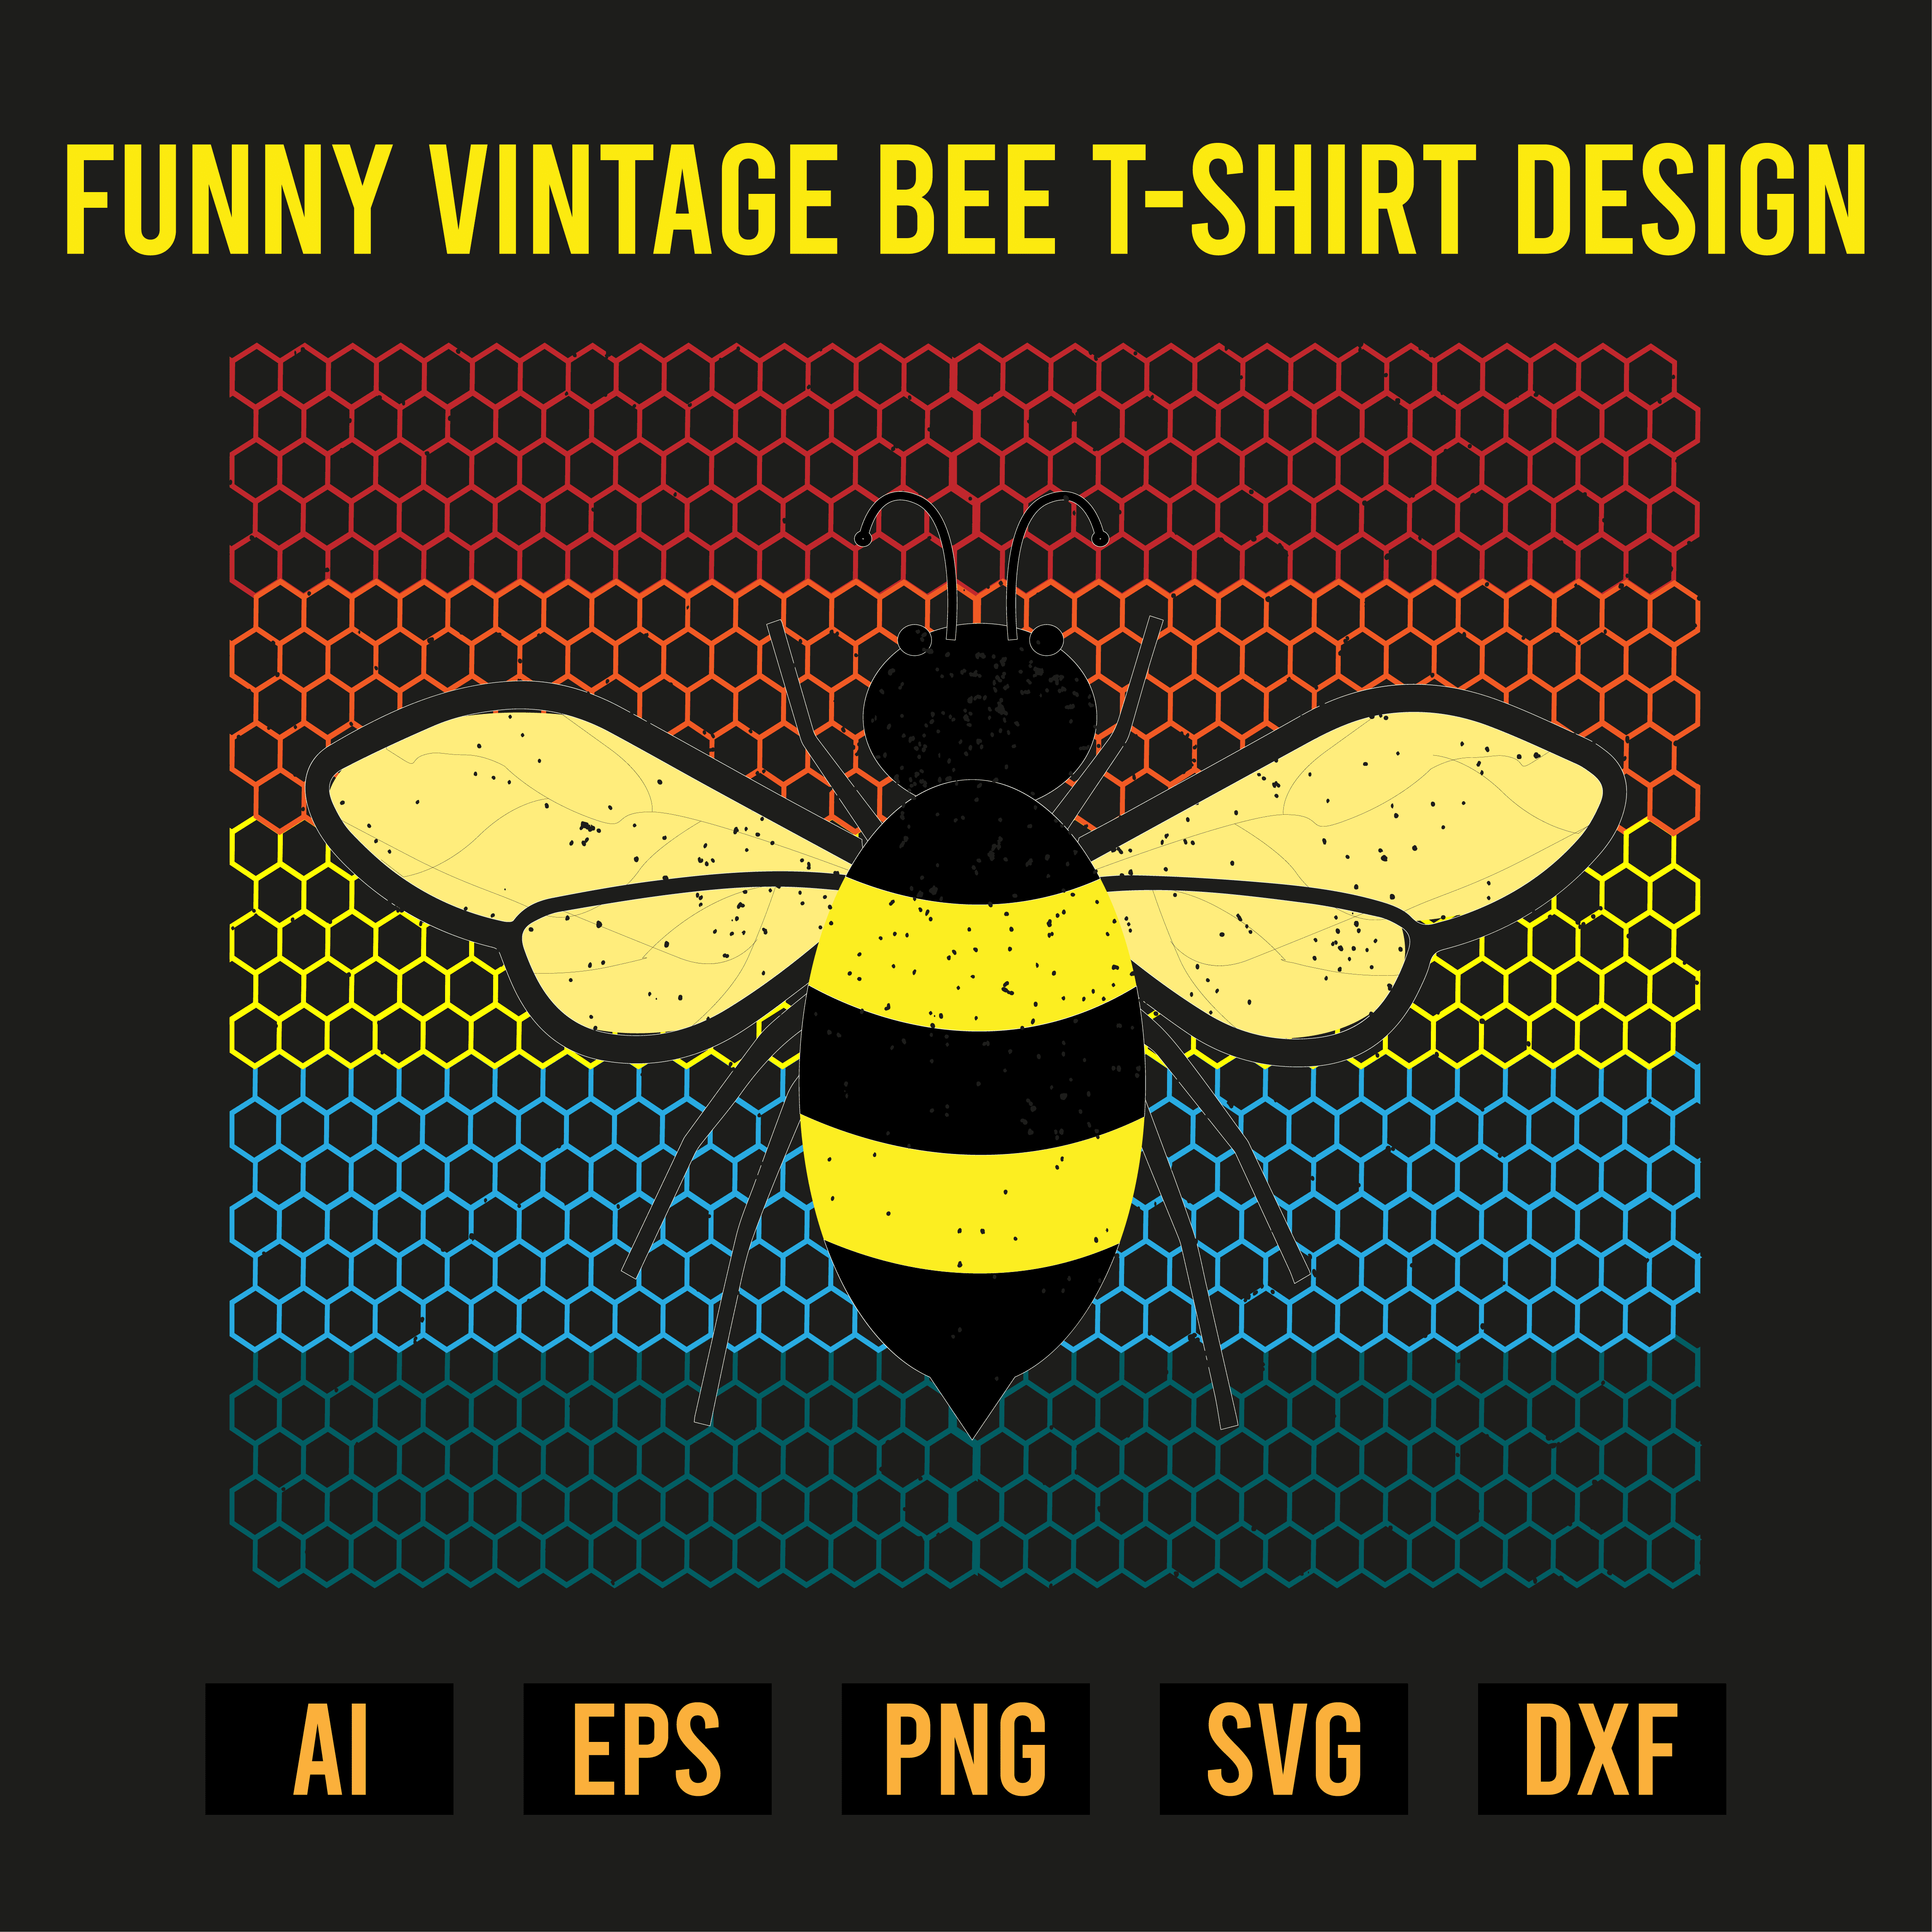 Funny Vintage Bee T- Shirt Design cover image.